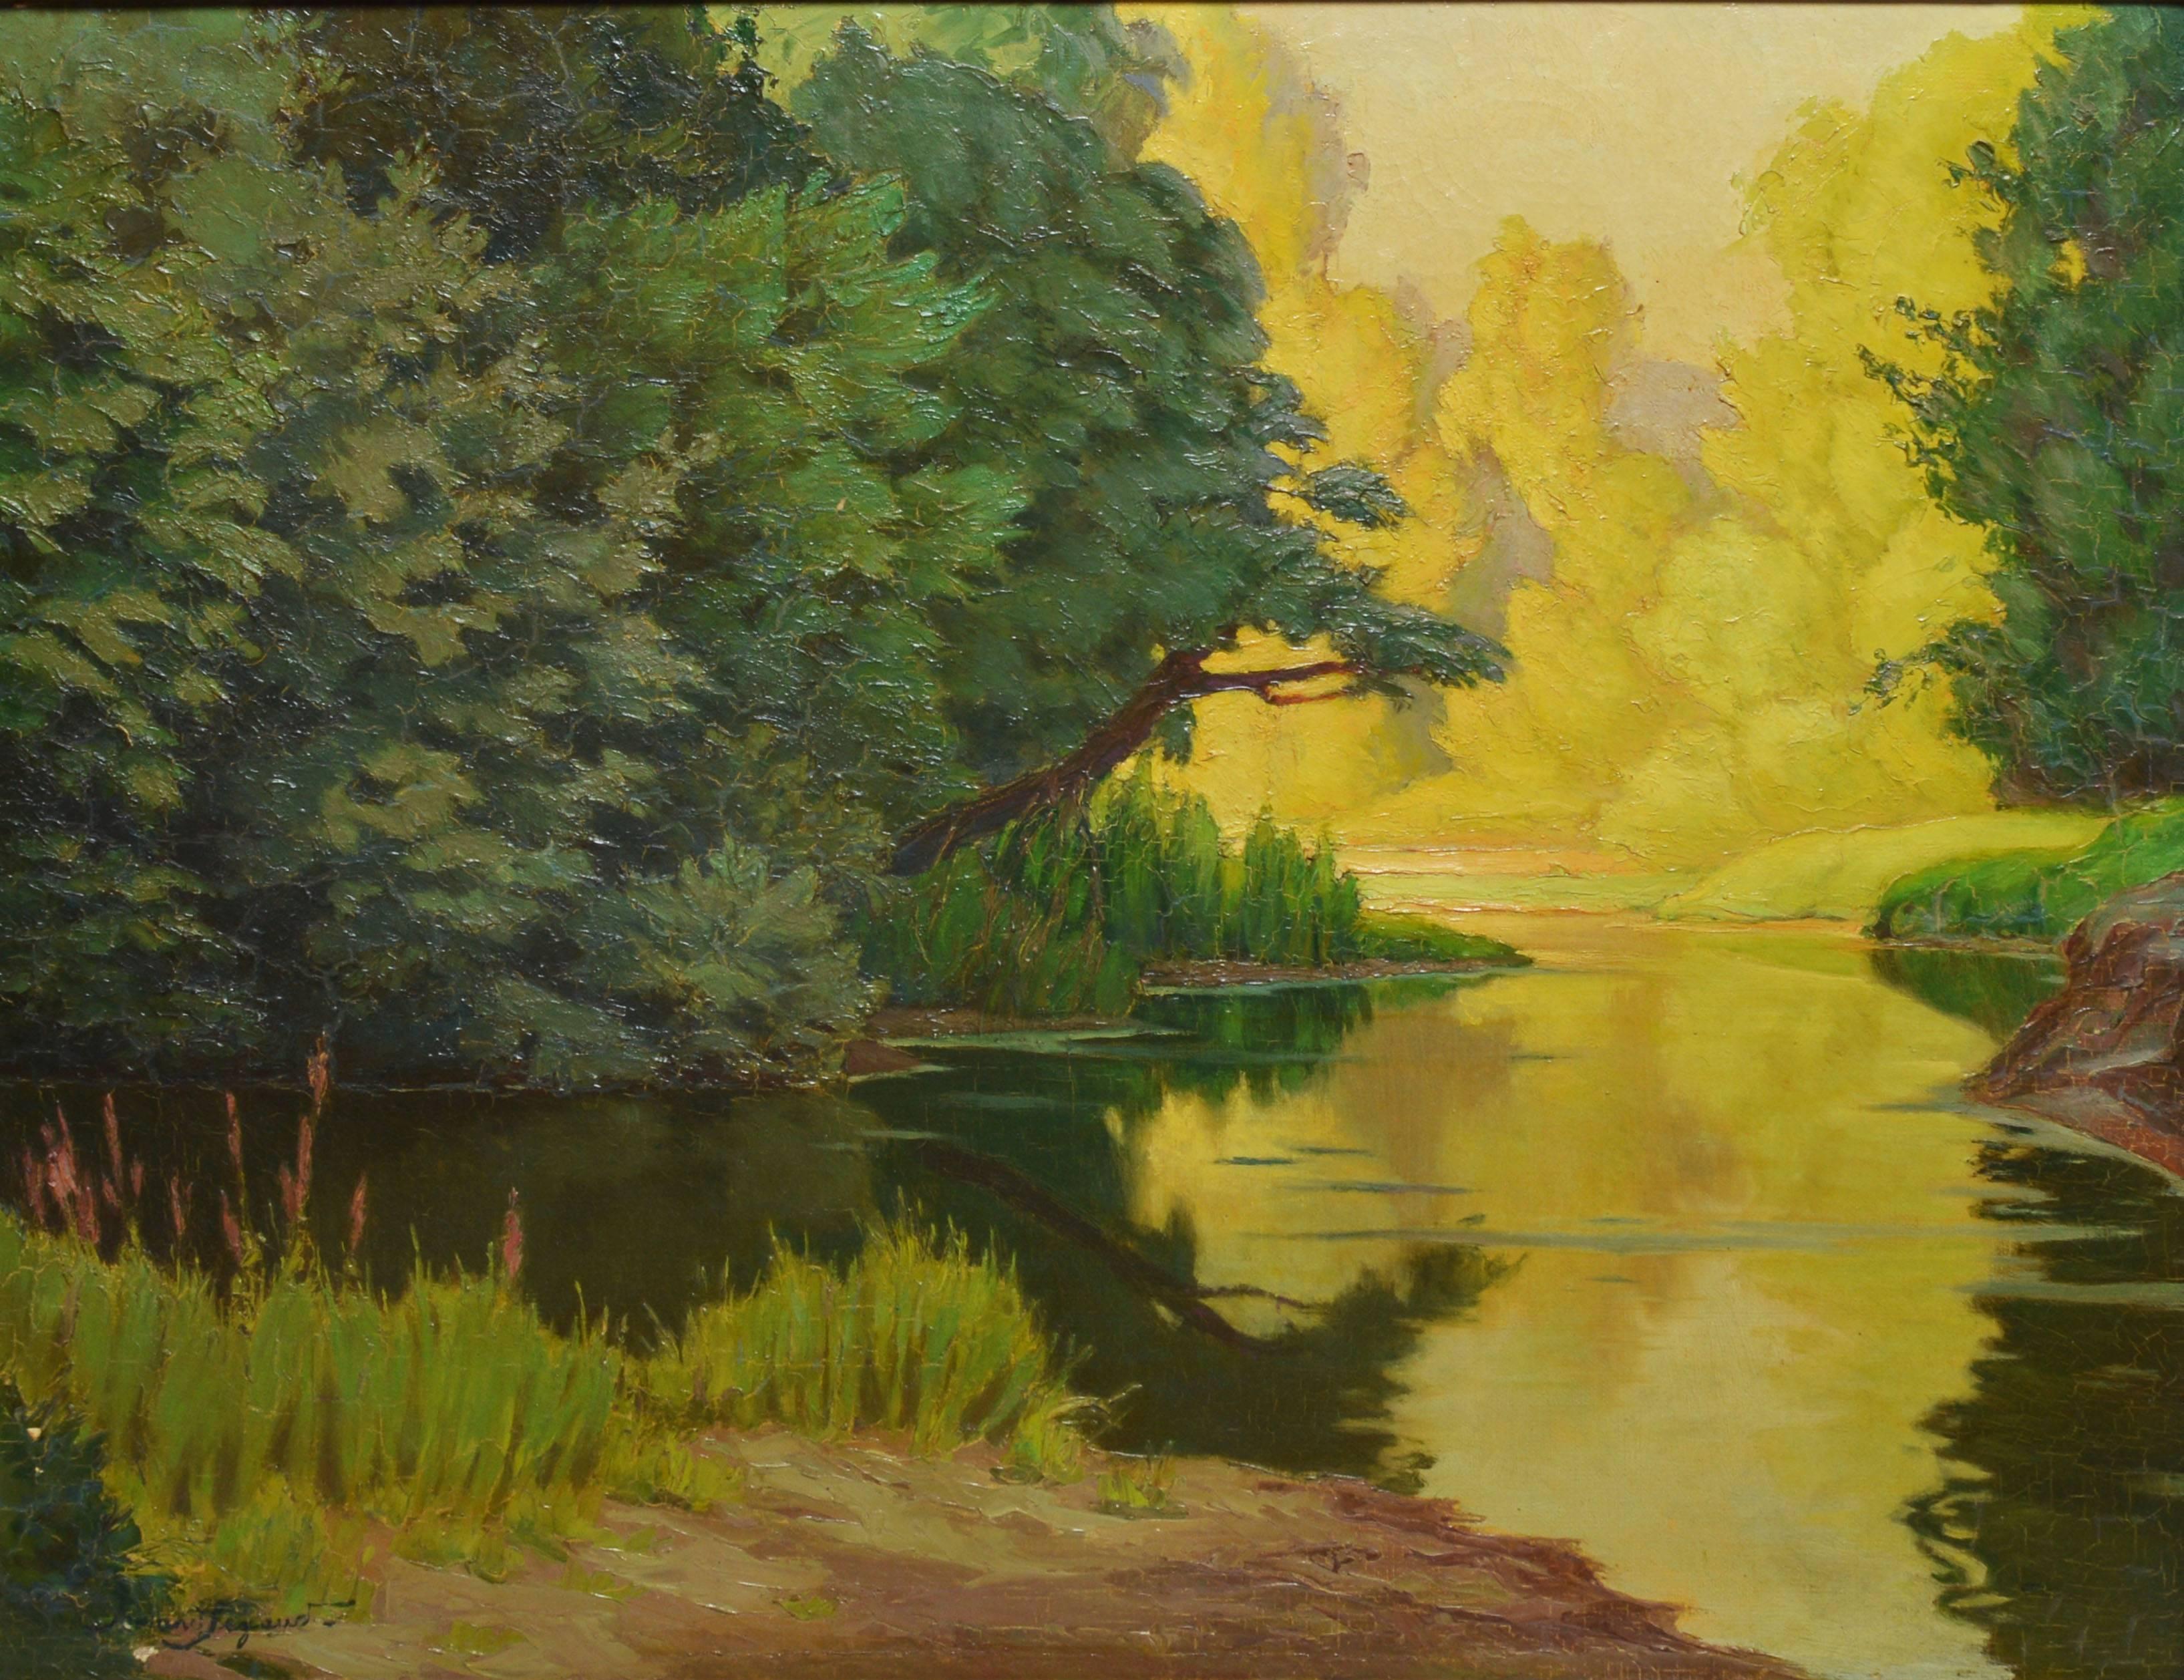 Impressionist river landscape by Armand Jean Baptiste Segaud (b.1875).  Oil on canvas, circa 1915.  Signed lower left, "Armand Segaud".  Displayed in a period impressionist frame.  Image size, 21.5"L x 18"H, overall 26"L x